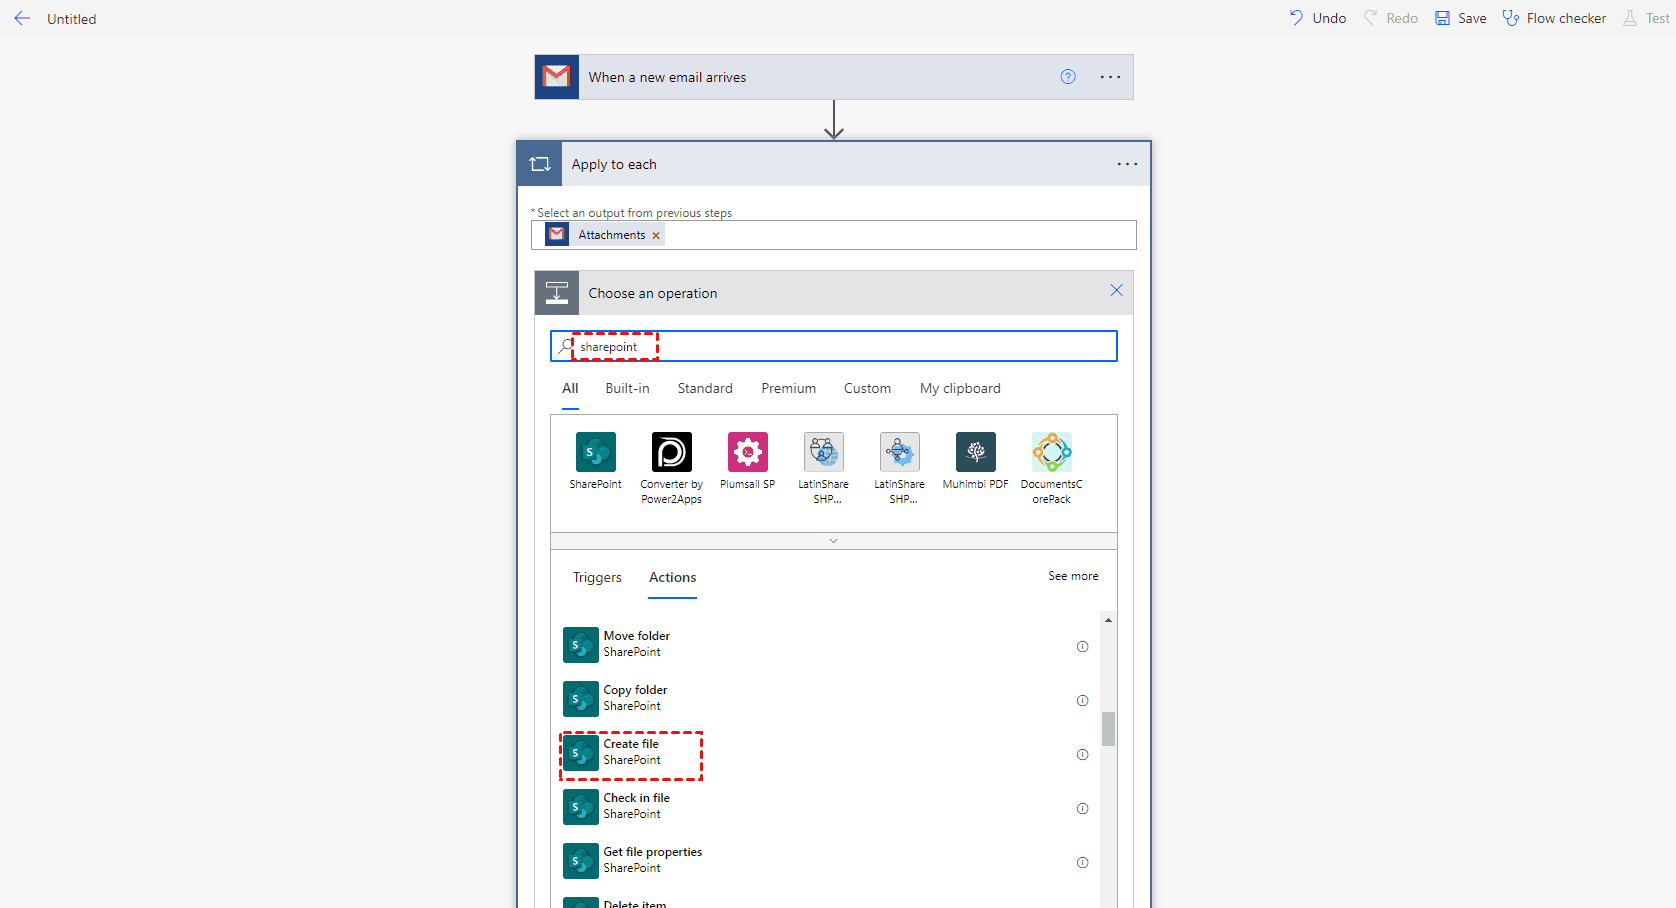 Create File in SharePoint